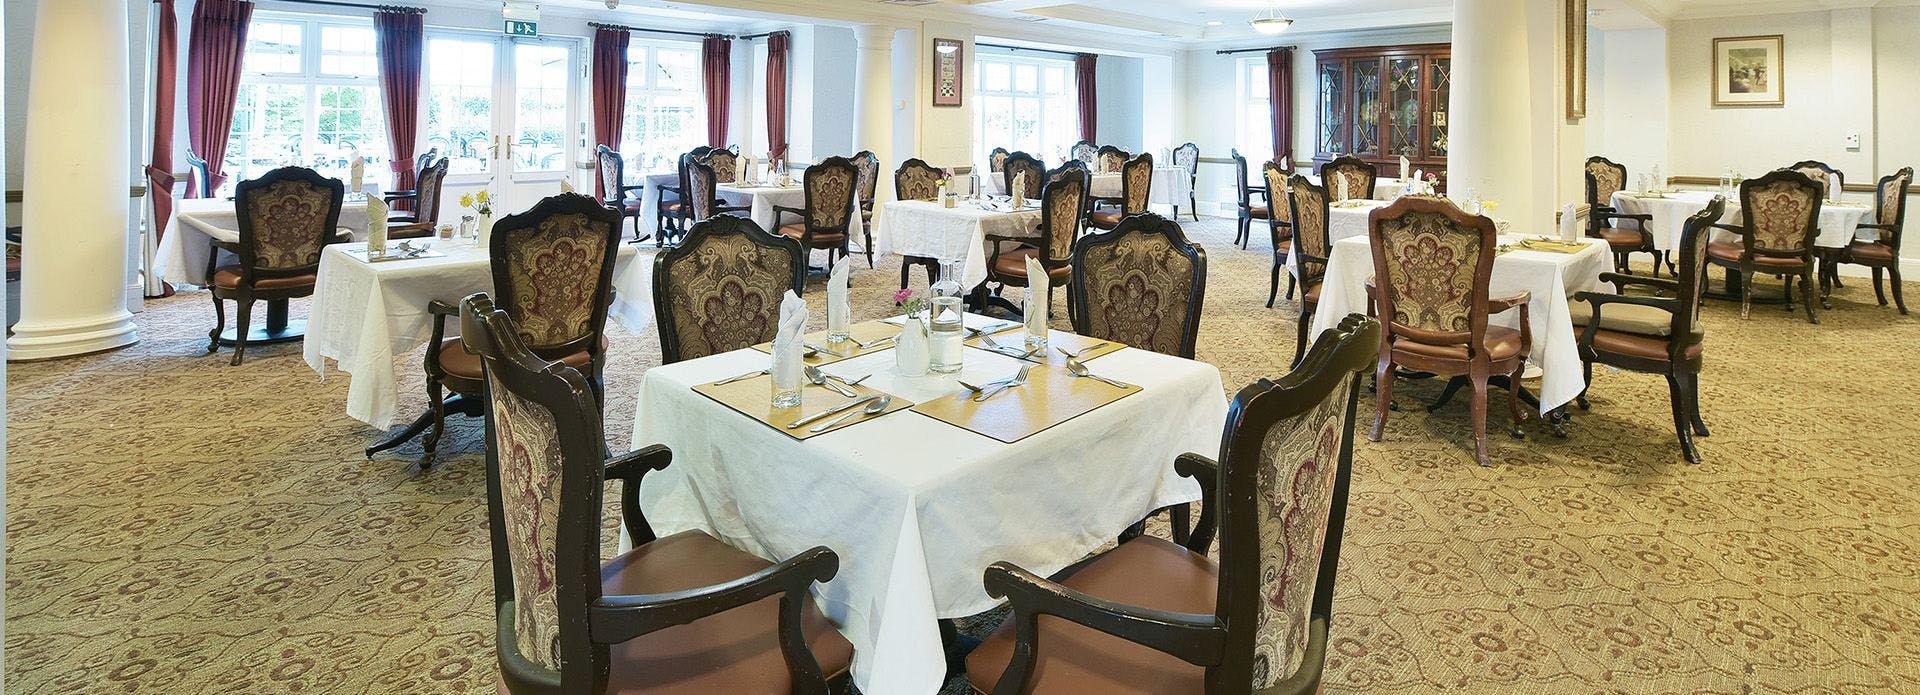 Dining Room at Guilford House Care Home in Guilford, Surrey